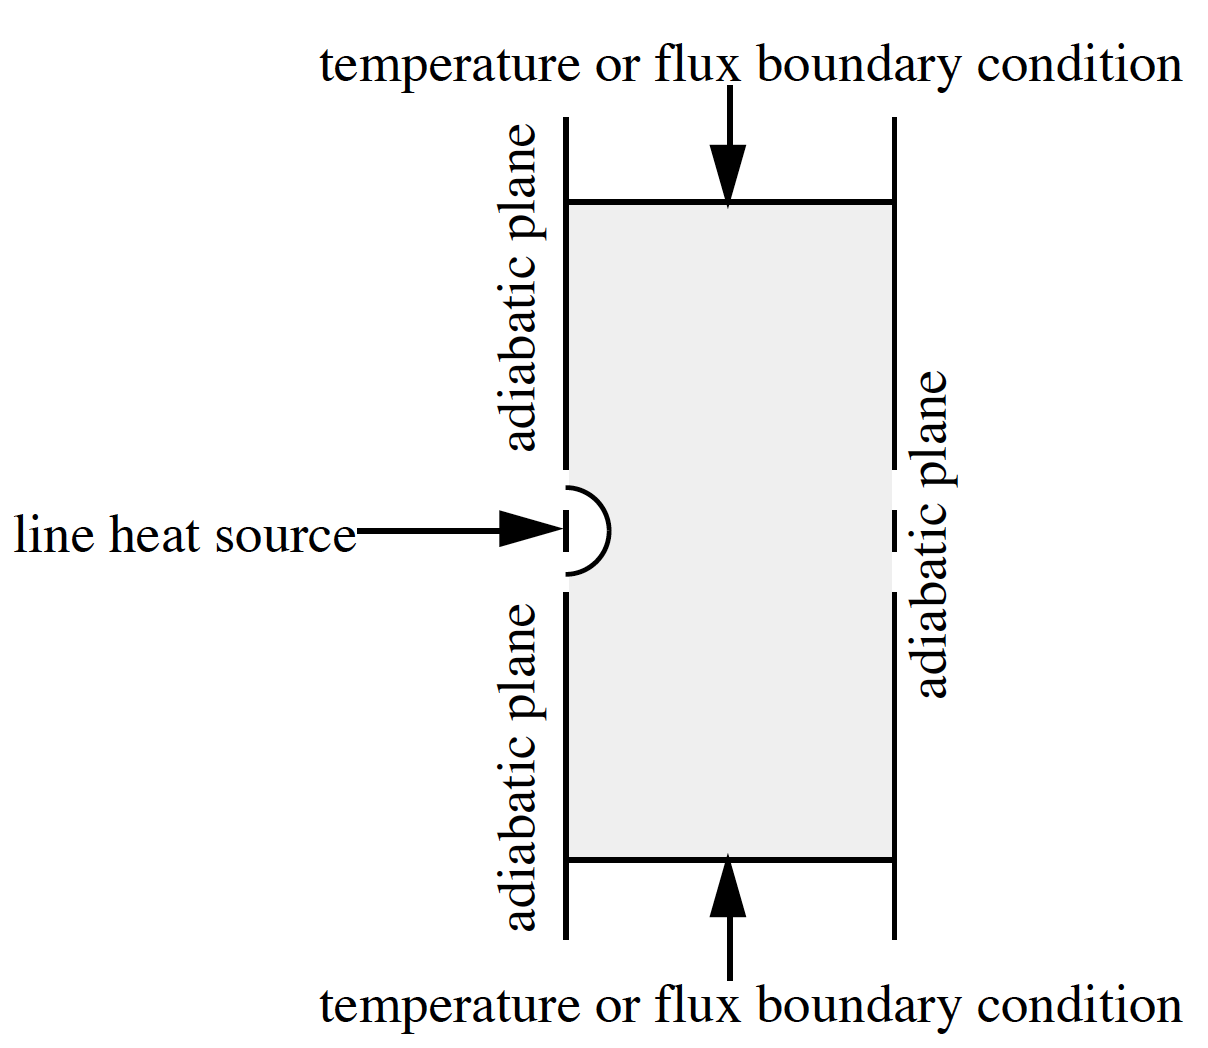 Two-Dimensional Solution Domain for a Low Temperature Radiant System [fig:two-dimensional-solution-domain-for-a-low-temperature-radiant-system]